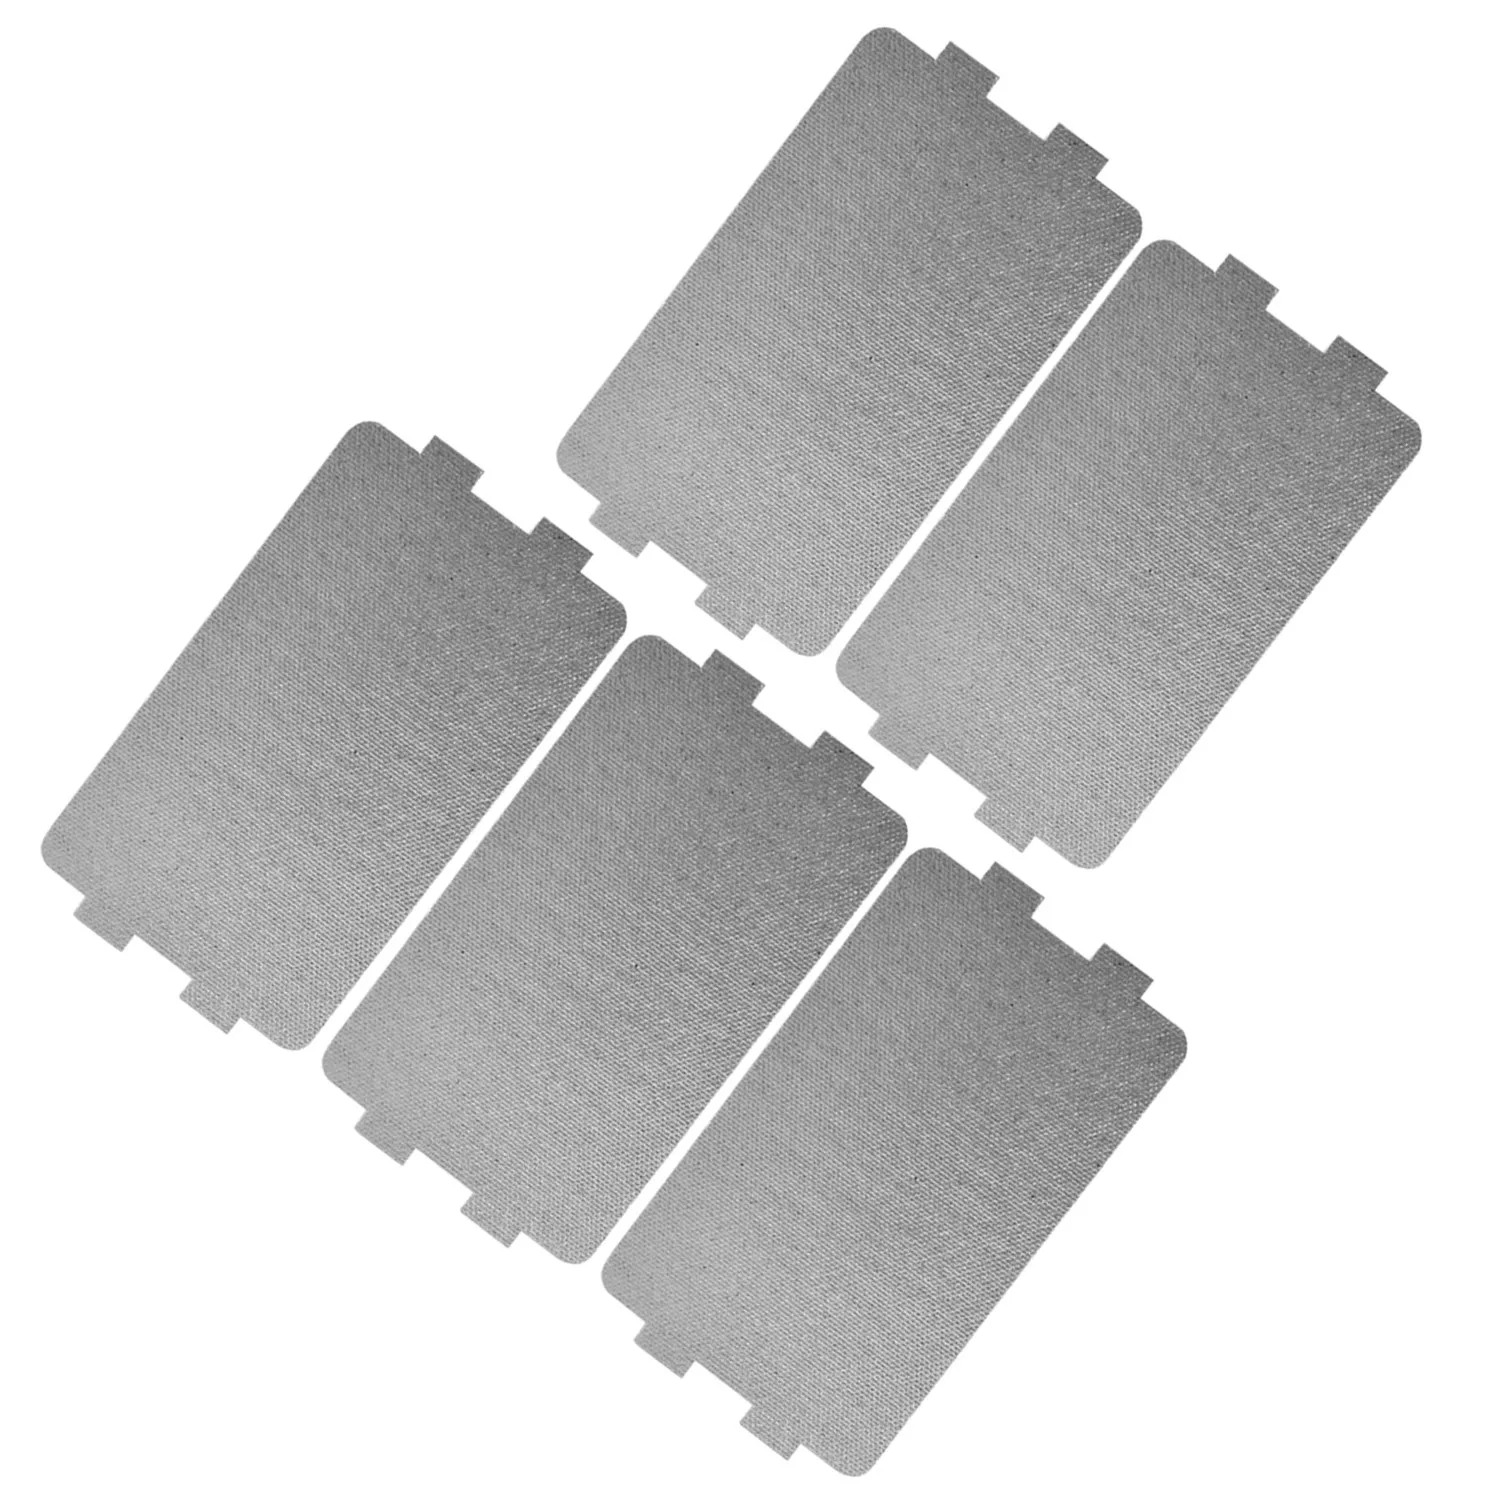 

5 X 5 X Universal Microwave Oven Mica Sheet Wave Guide Waveguide Cover Sheet Plates For Magnetron Cap Microwave Oven Plate